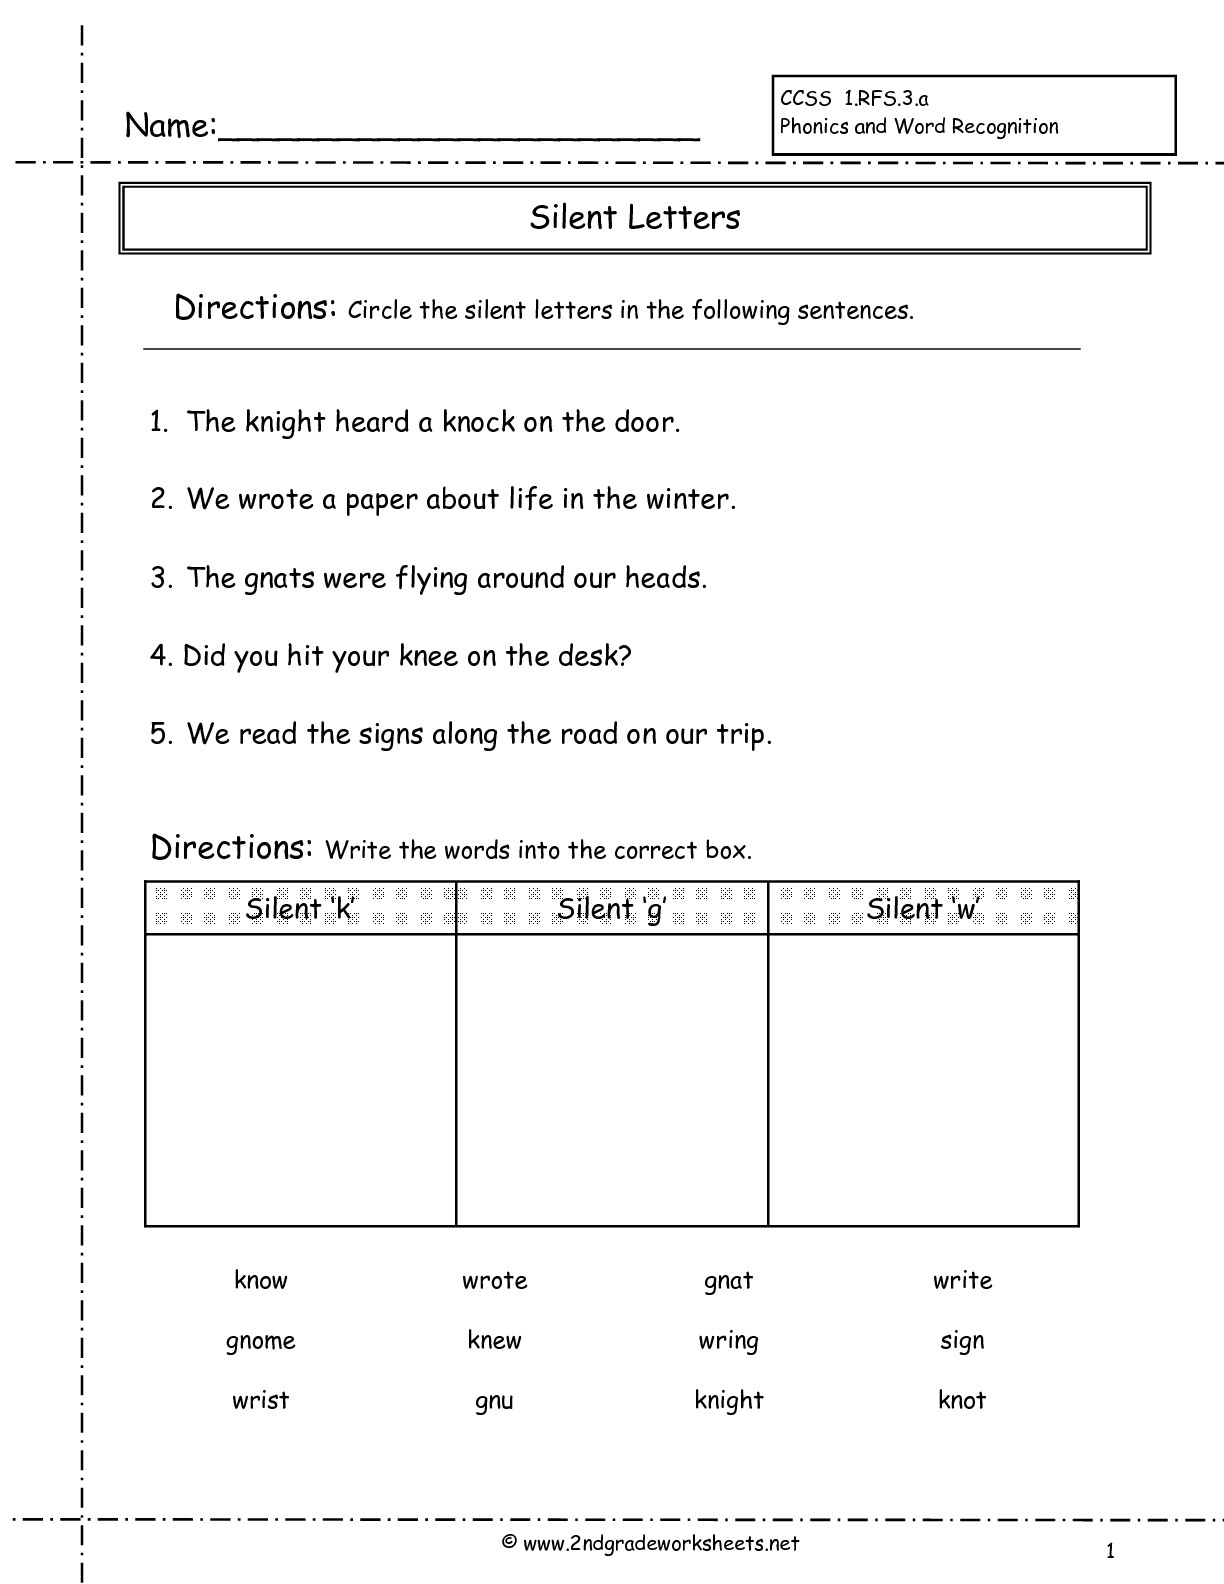 Second Grade Phonics Worksheets And Flashcards - Free Printable | Free Printable Phonics Worksheets For Second Grade